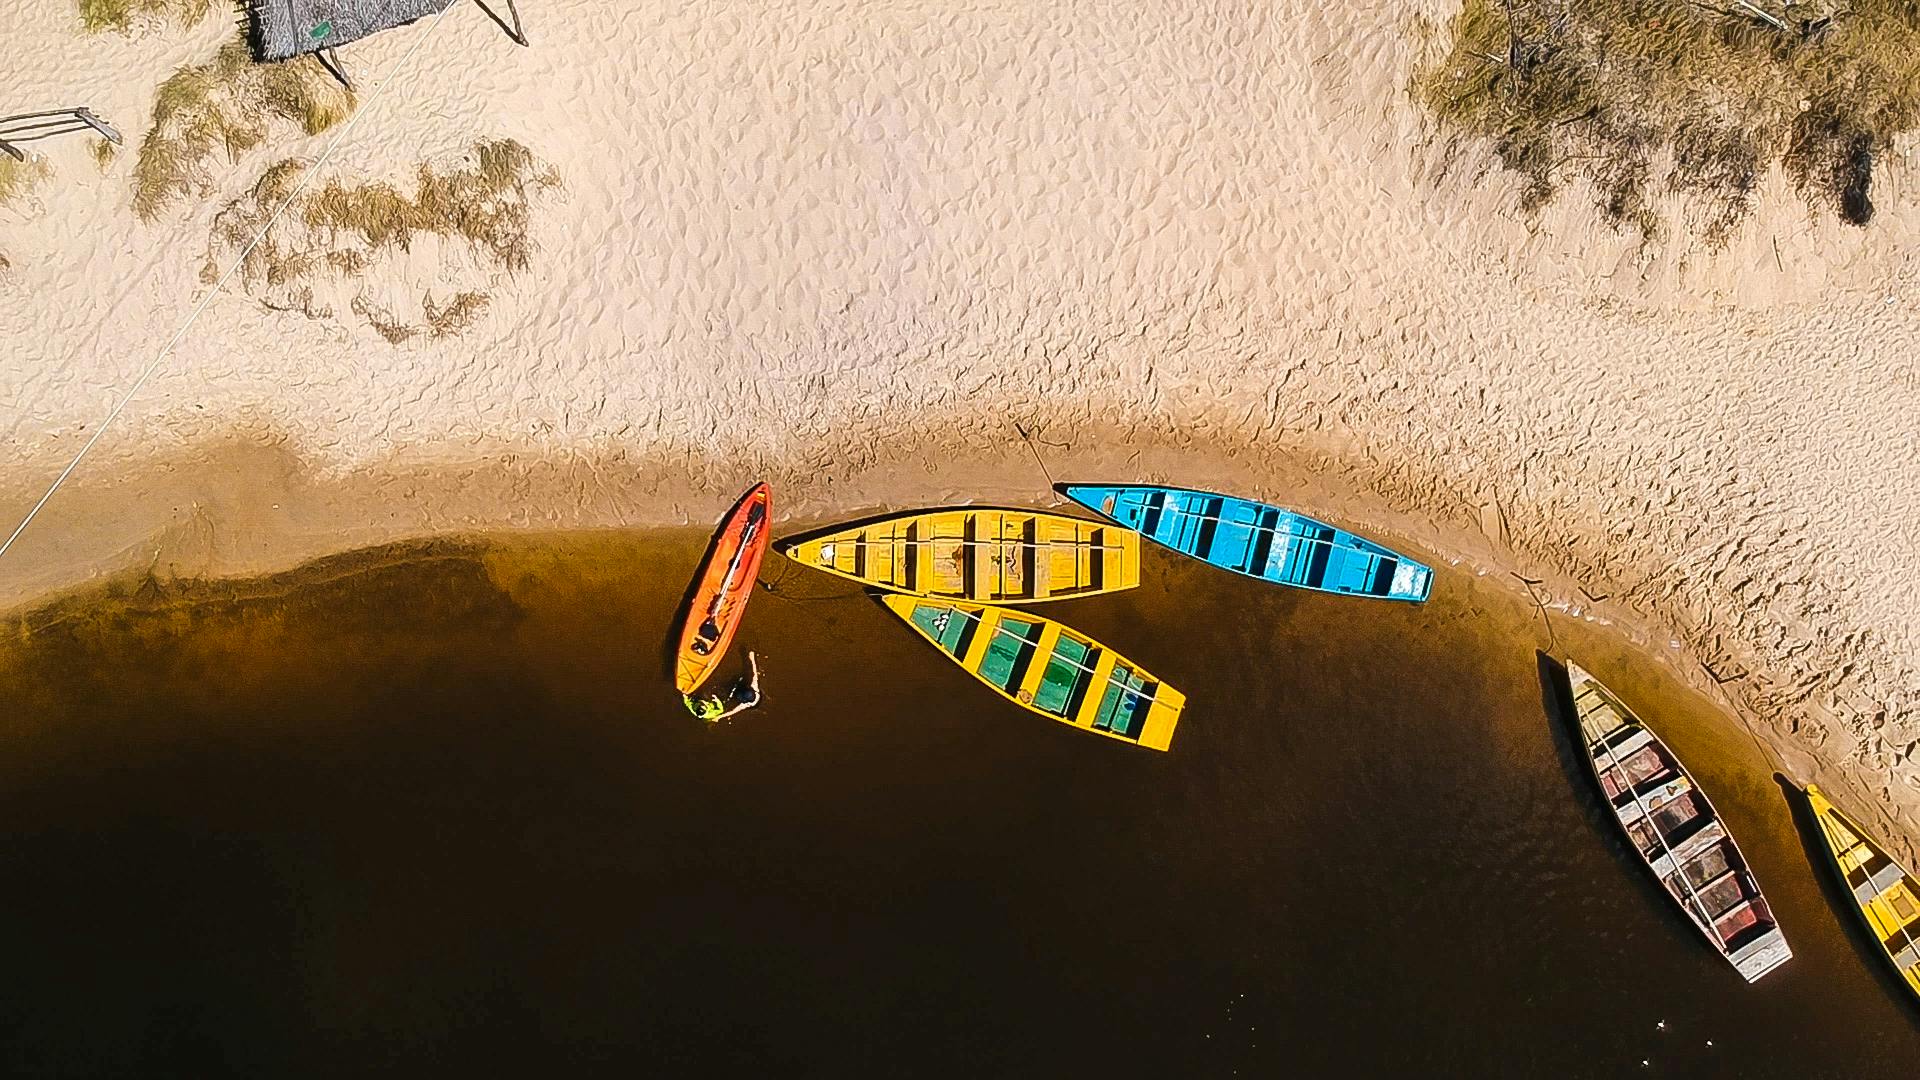 Top View of Assorted-colored Row Boats · Free Stock Photo